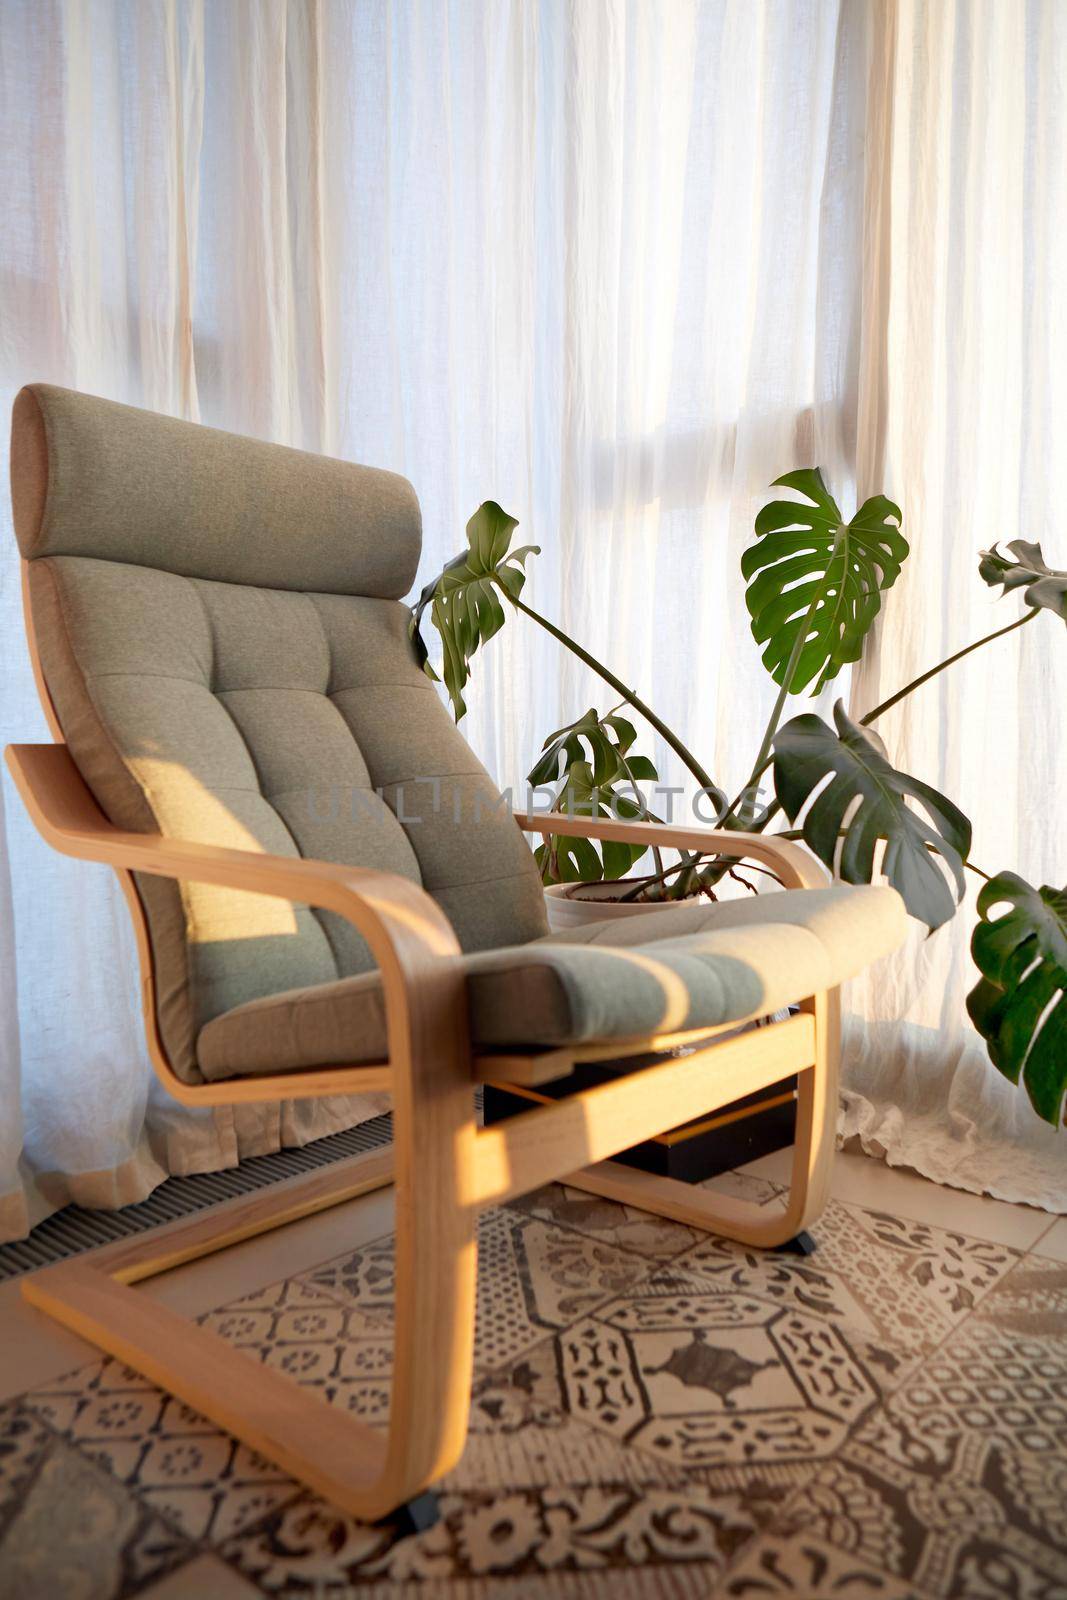 Cozy armchair and potted exotic plant placed near window daylight by Demkat